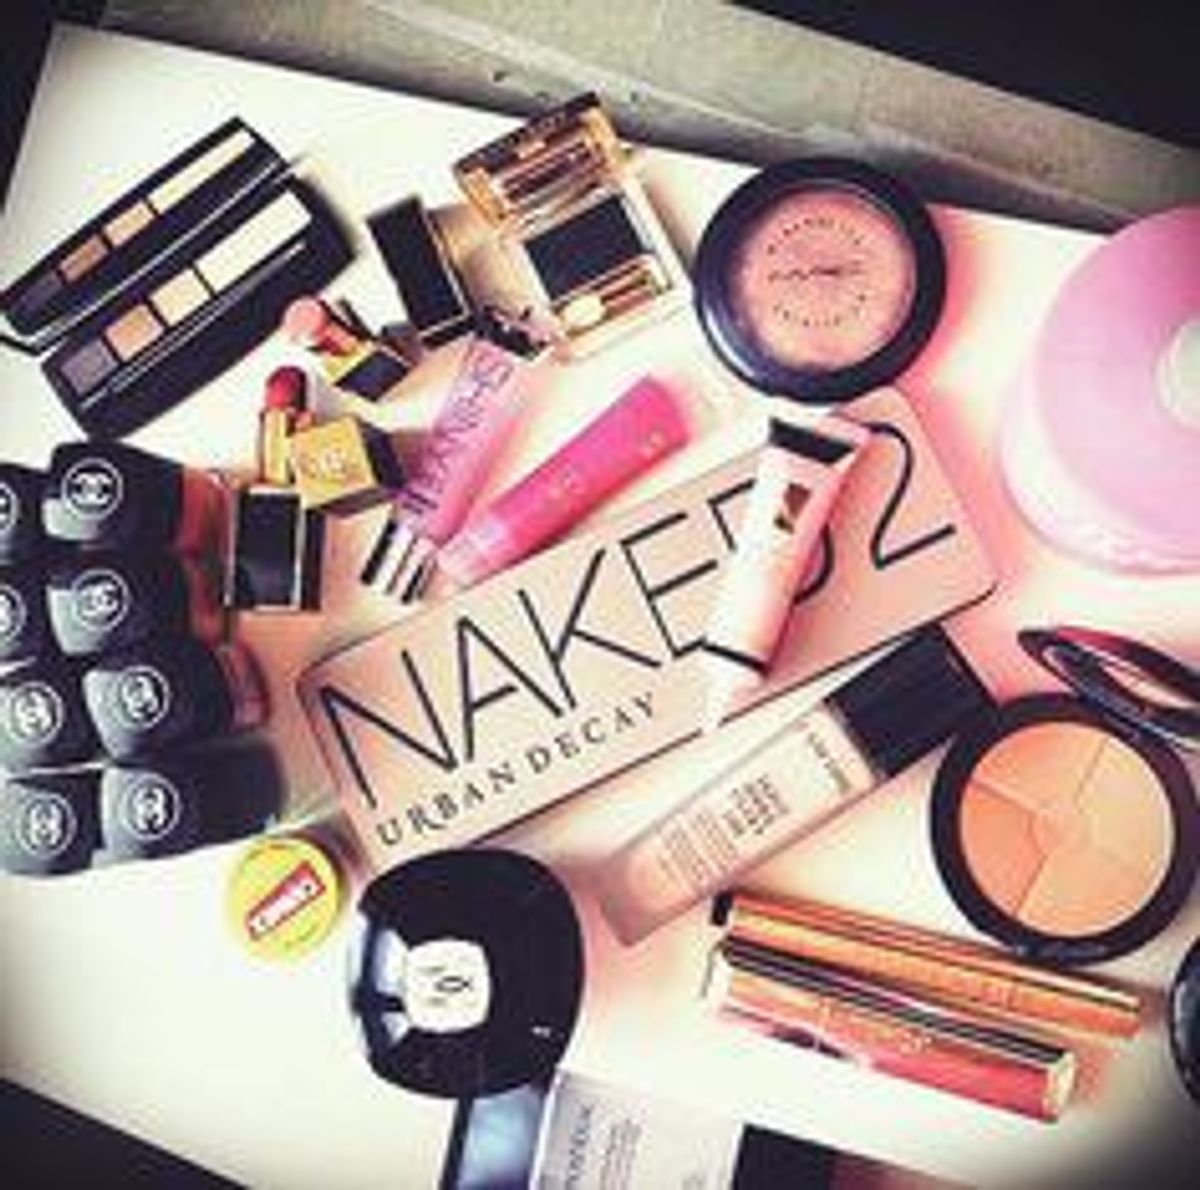 My Favorite Makeup And Beauty Products